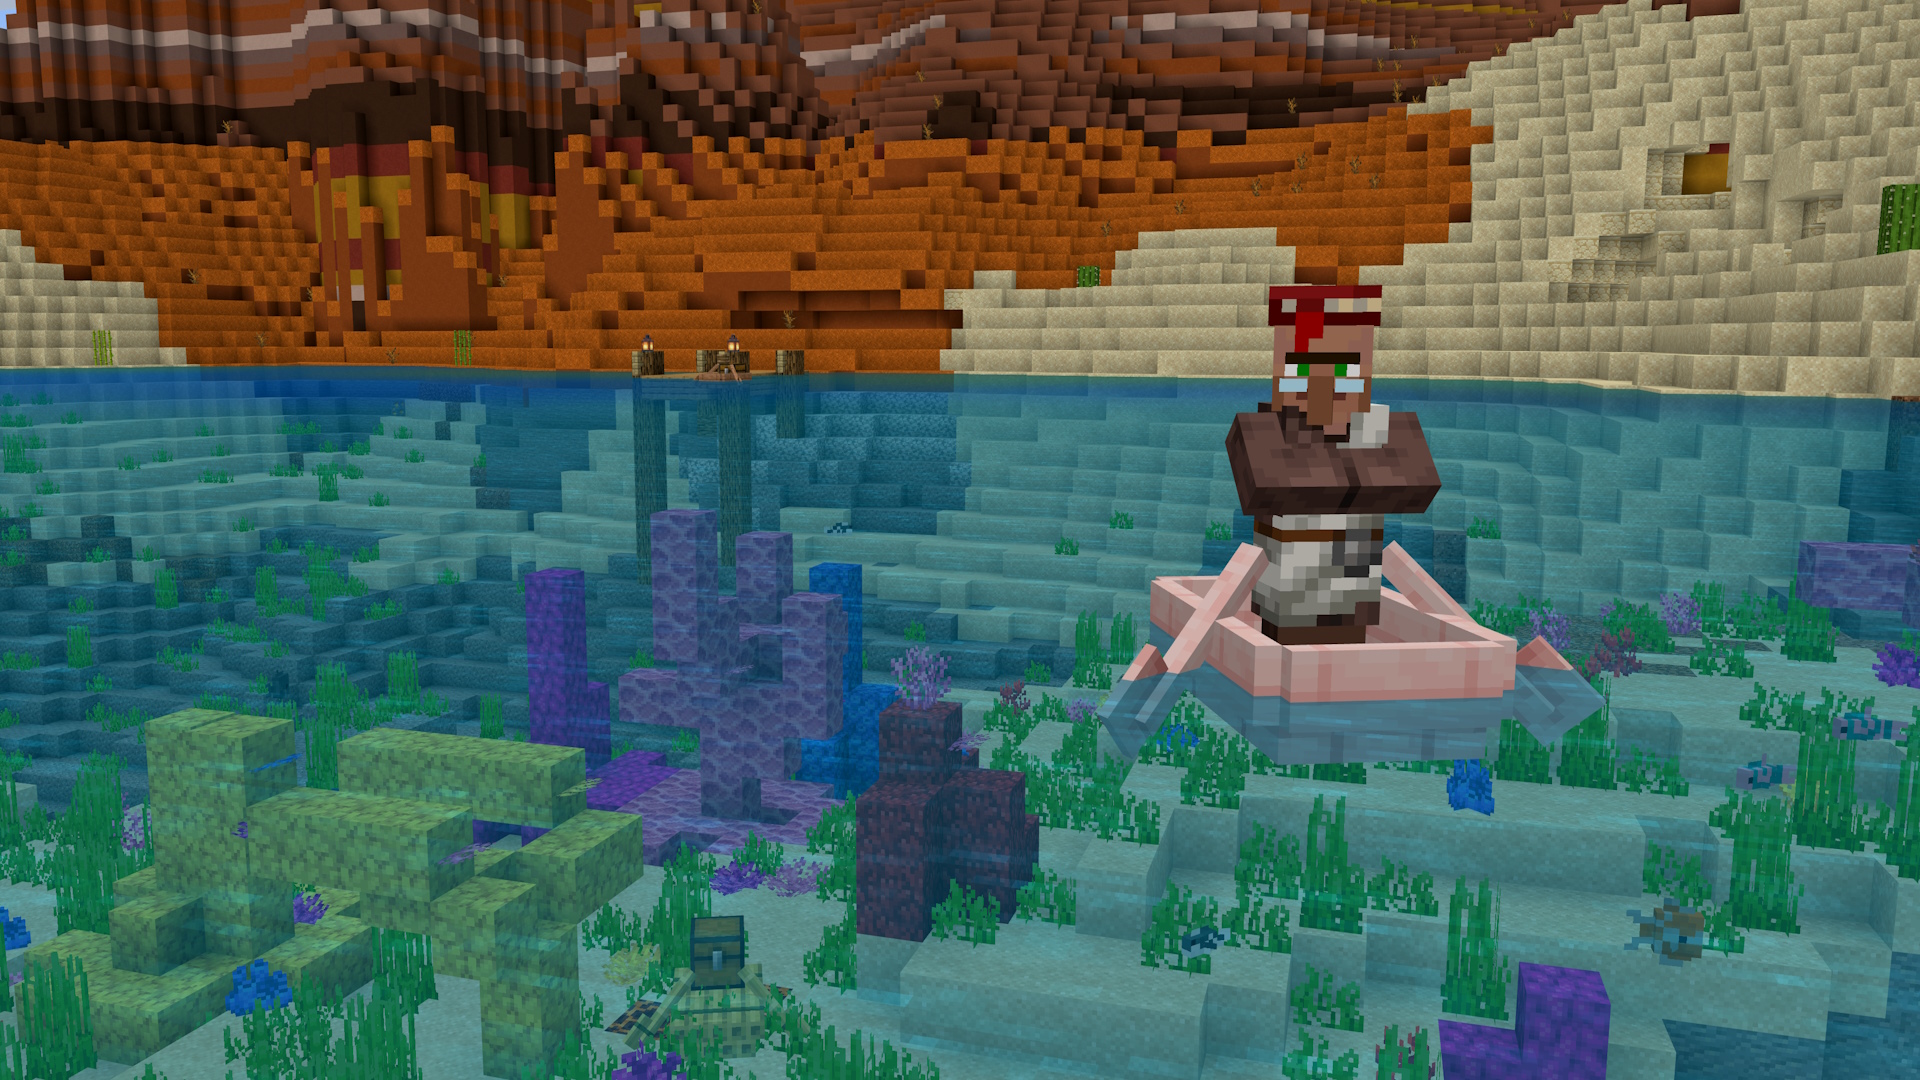 A Minecraft screenshot of a Villager in a cherry-wood boat, floating over a warm ocean biome, with a sunken chest boat below. There is a small jetty in the background.